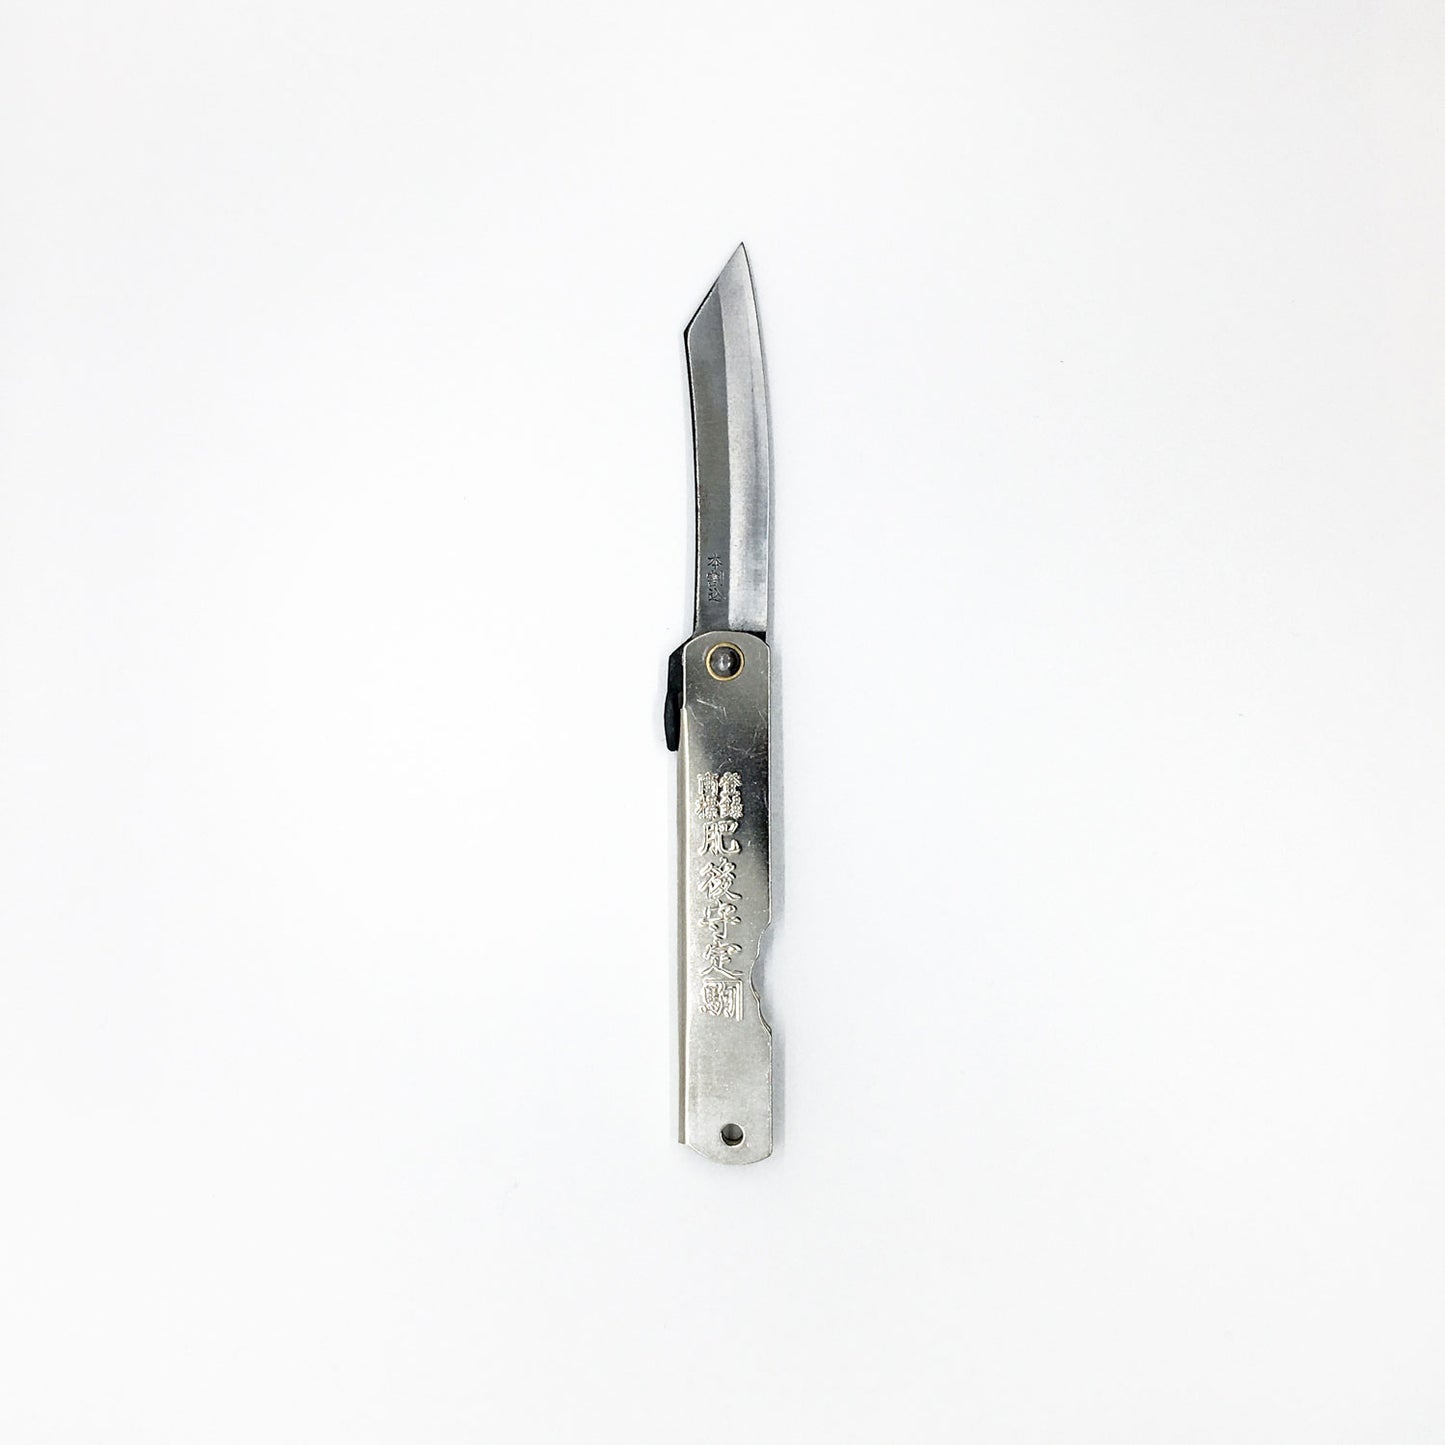 a silver foldable pocket knife with japanese writing embossed logo on handle